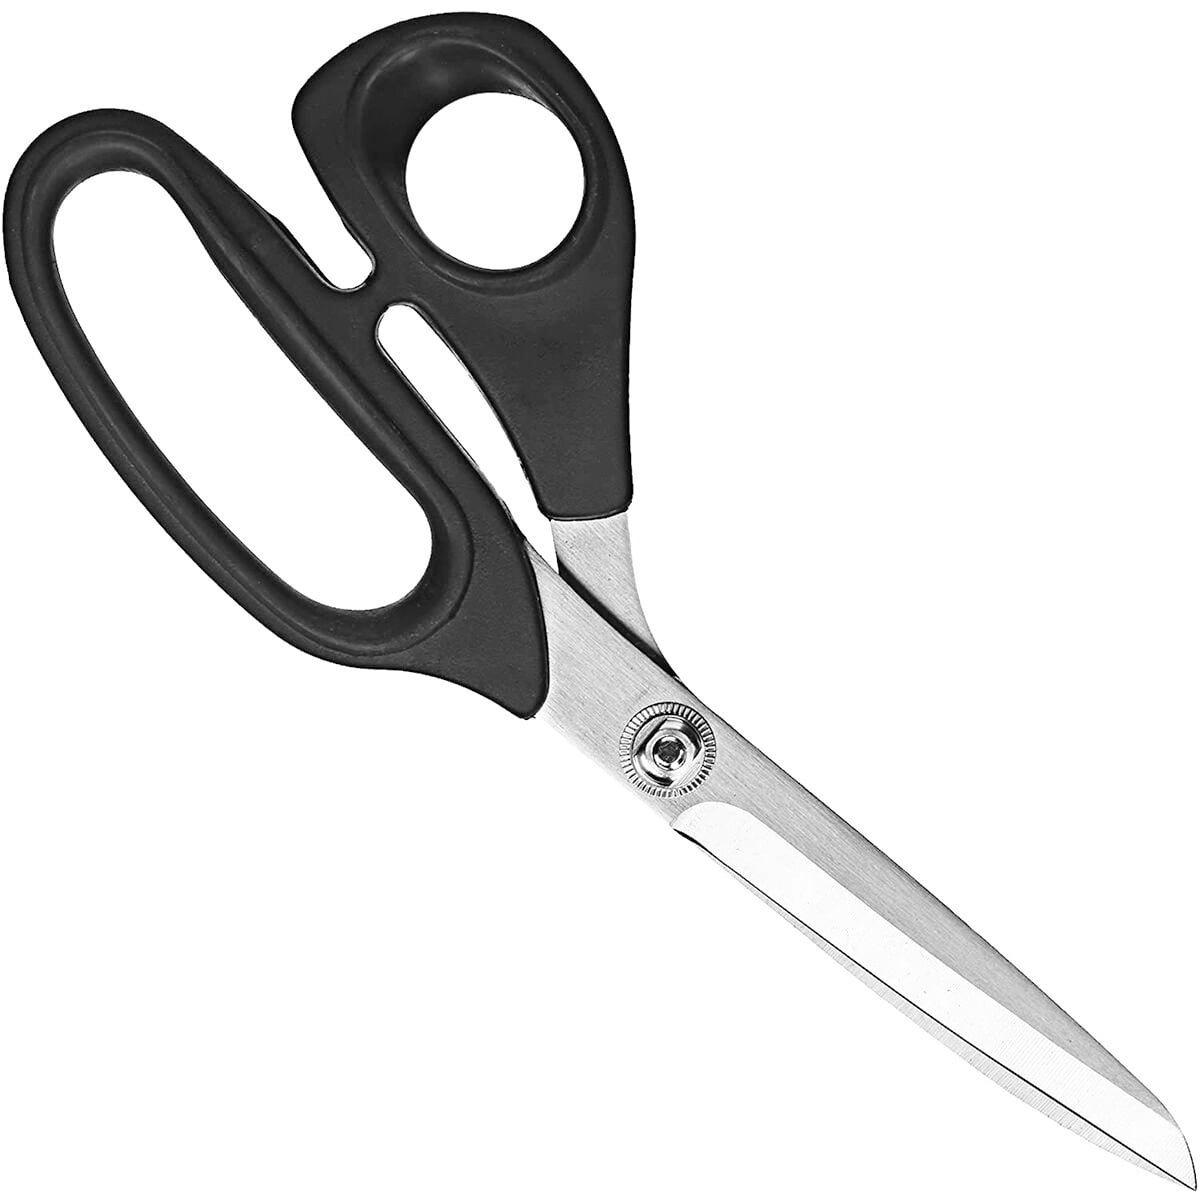 Sewing Scissors for Fabric Cutting - Heavy Duty Scissors - Ultra Sharp Sewing Shears for Quilting, Sewing, and Dressmaking with Tape Measure, Thread